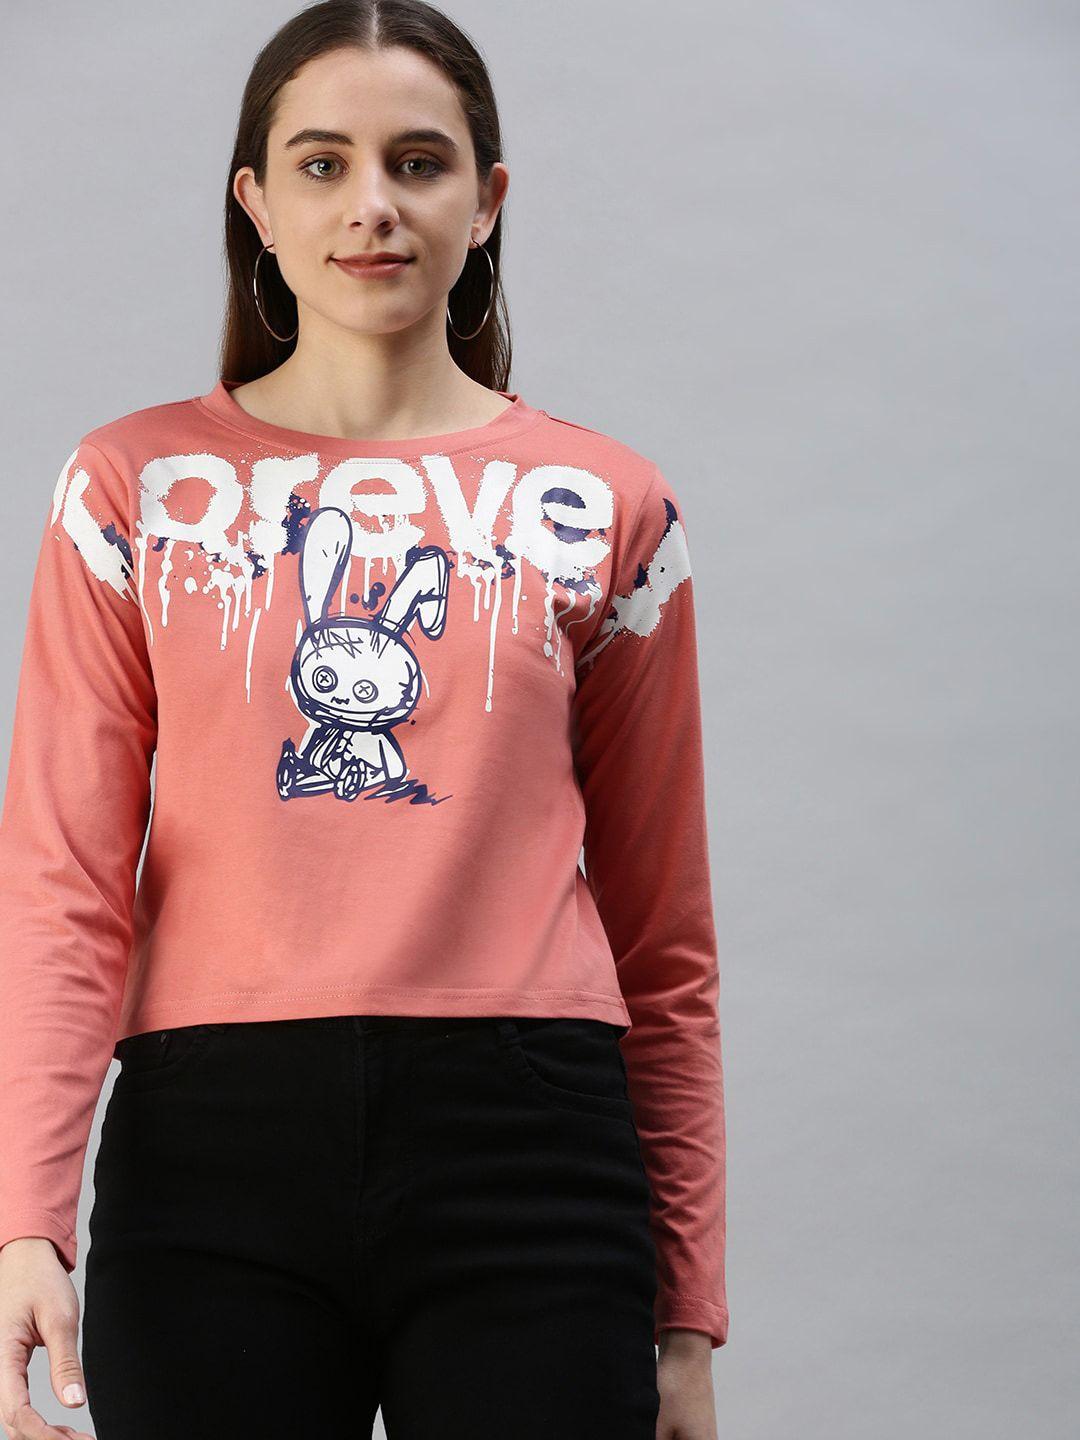 juneberry-graphic-printed-long-sleeves-cotton-crop-top